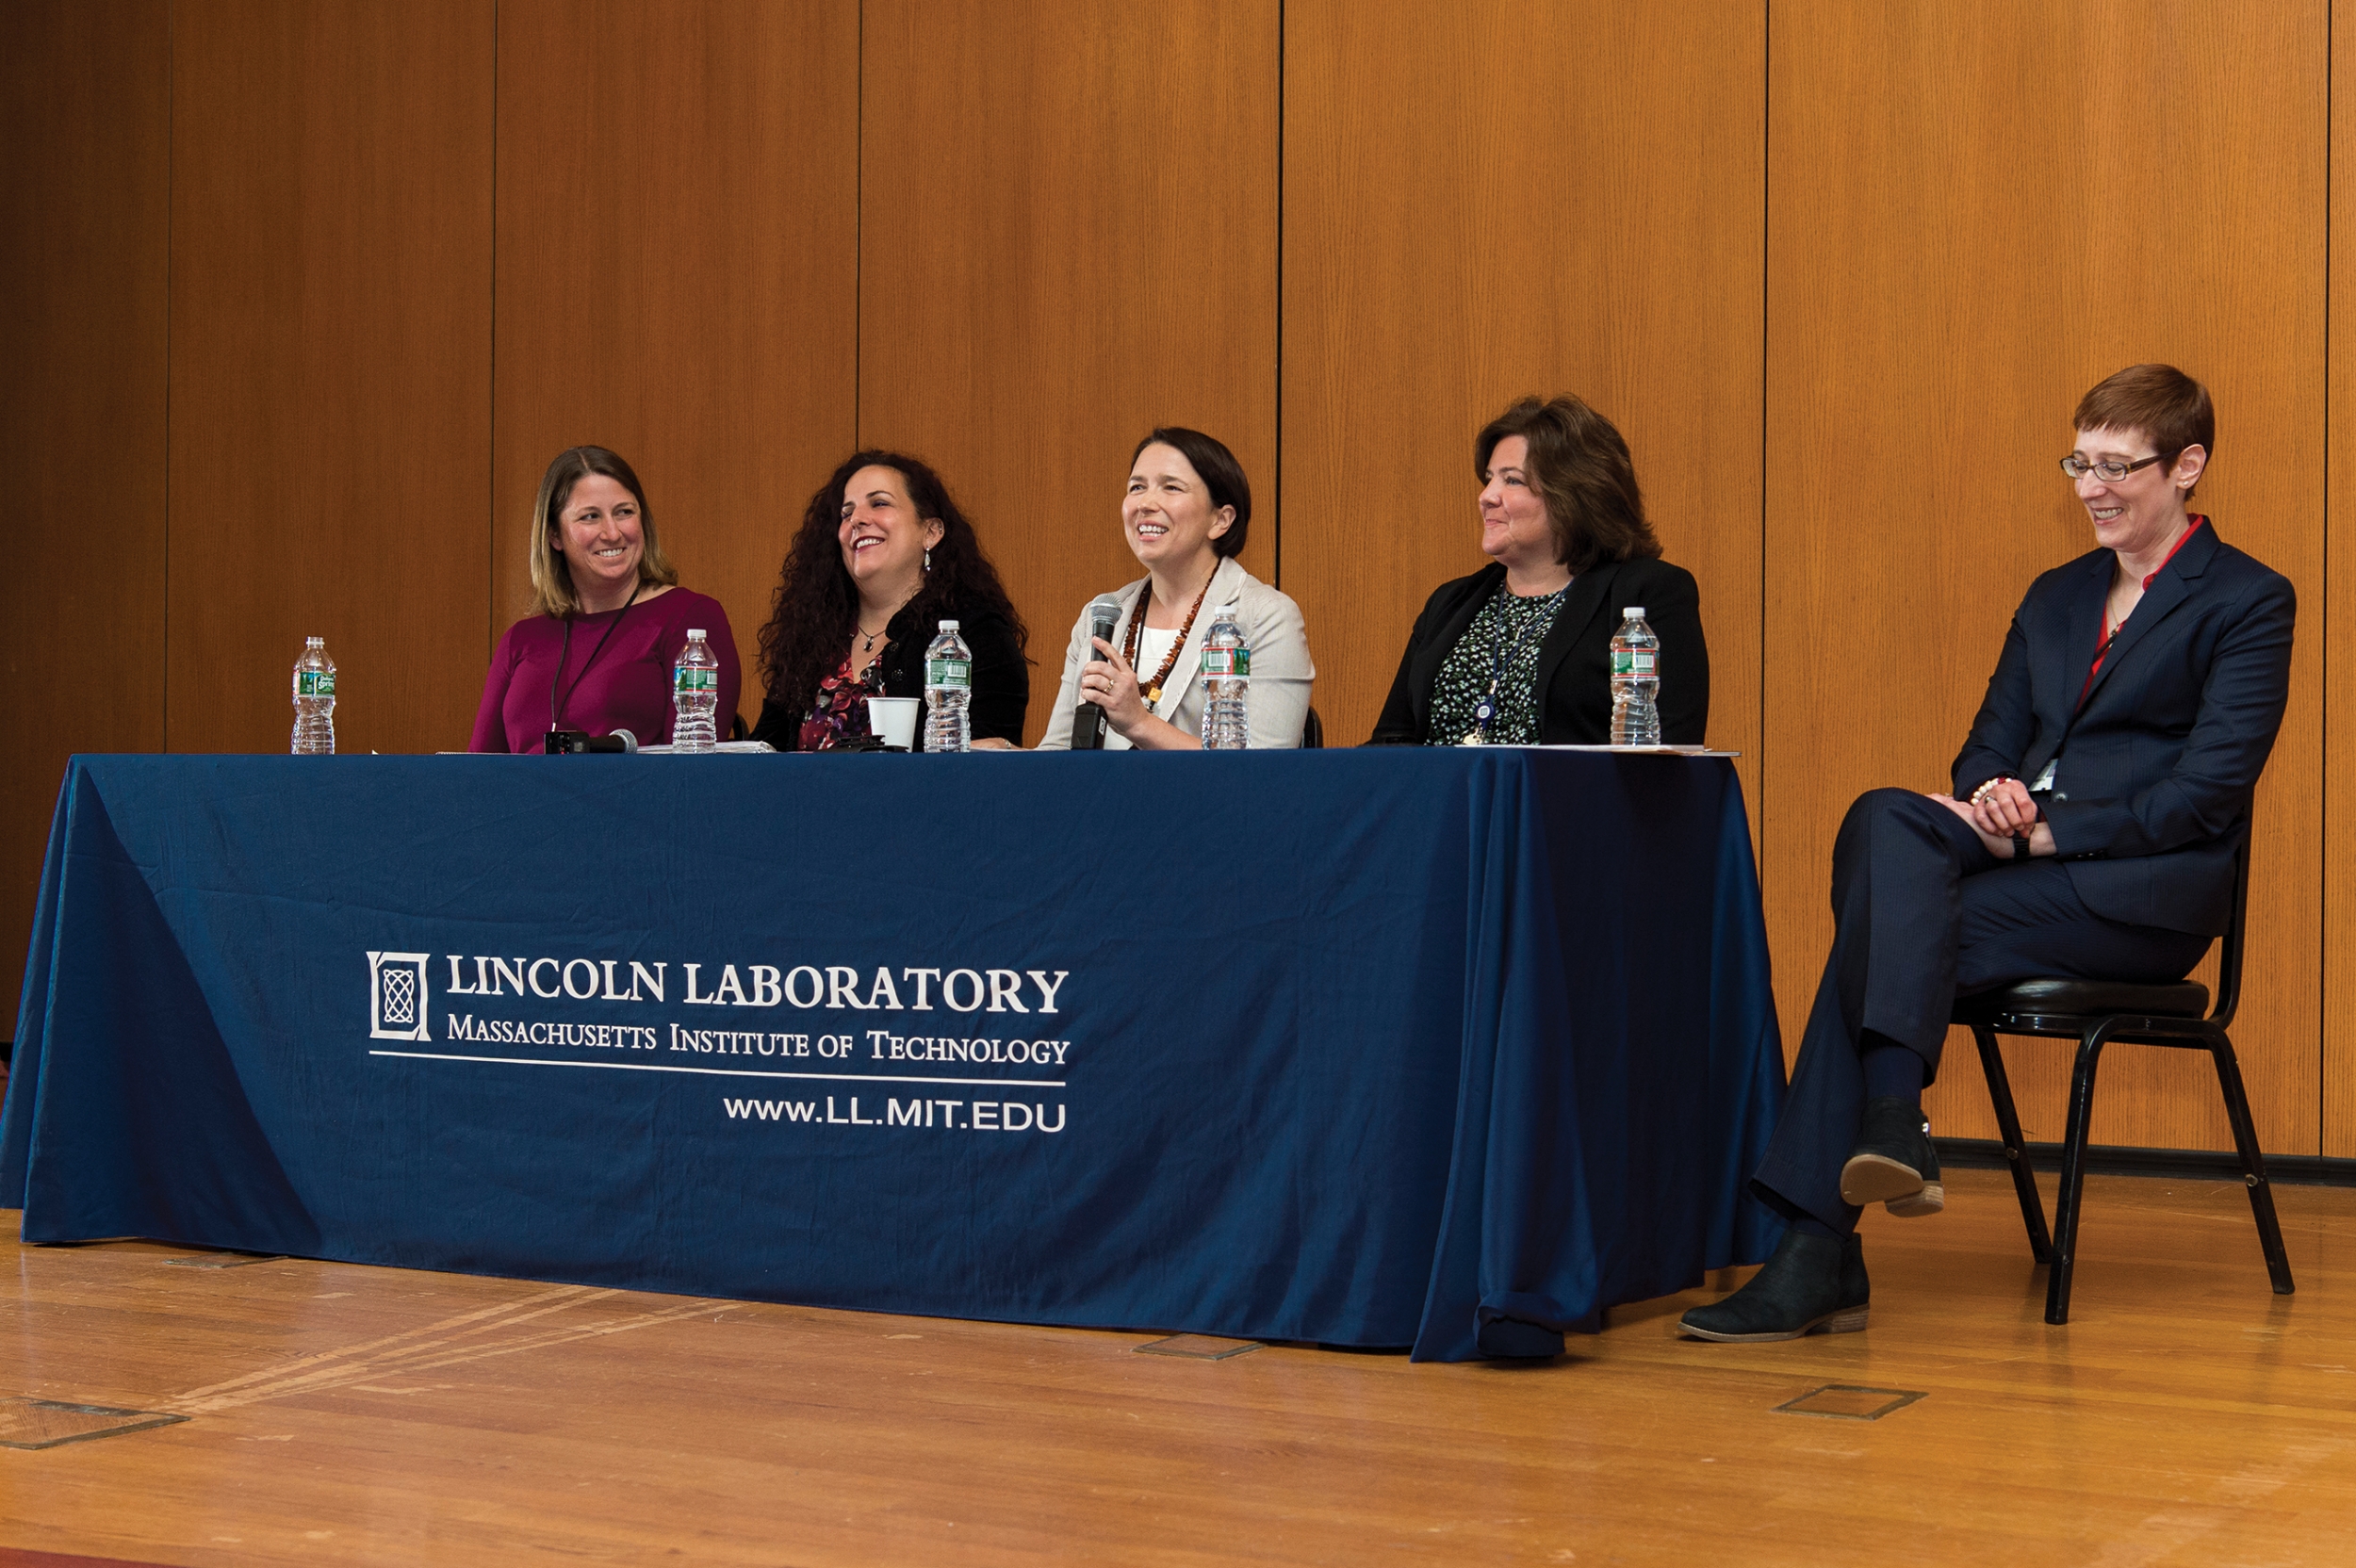 LLWN hosted a panel discussion in celebration of Women's History Month, during which members shared their experiences transitioning to management roles in fields that are predominantly led by men and discussed ways to address workplace inequality.